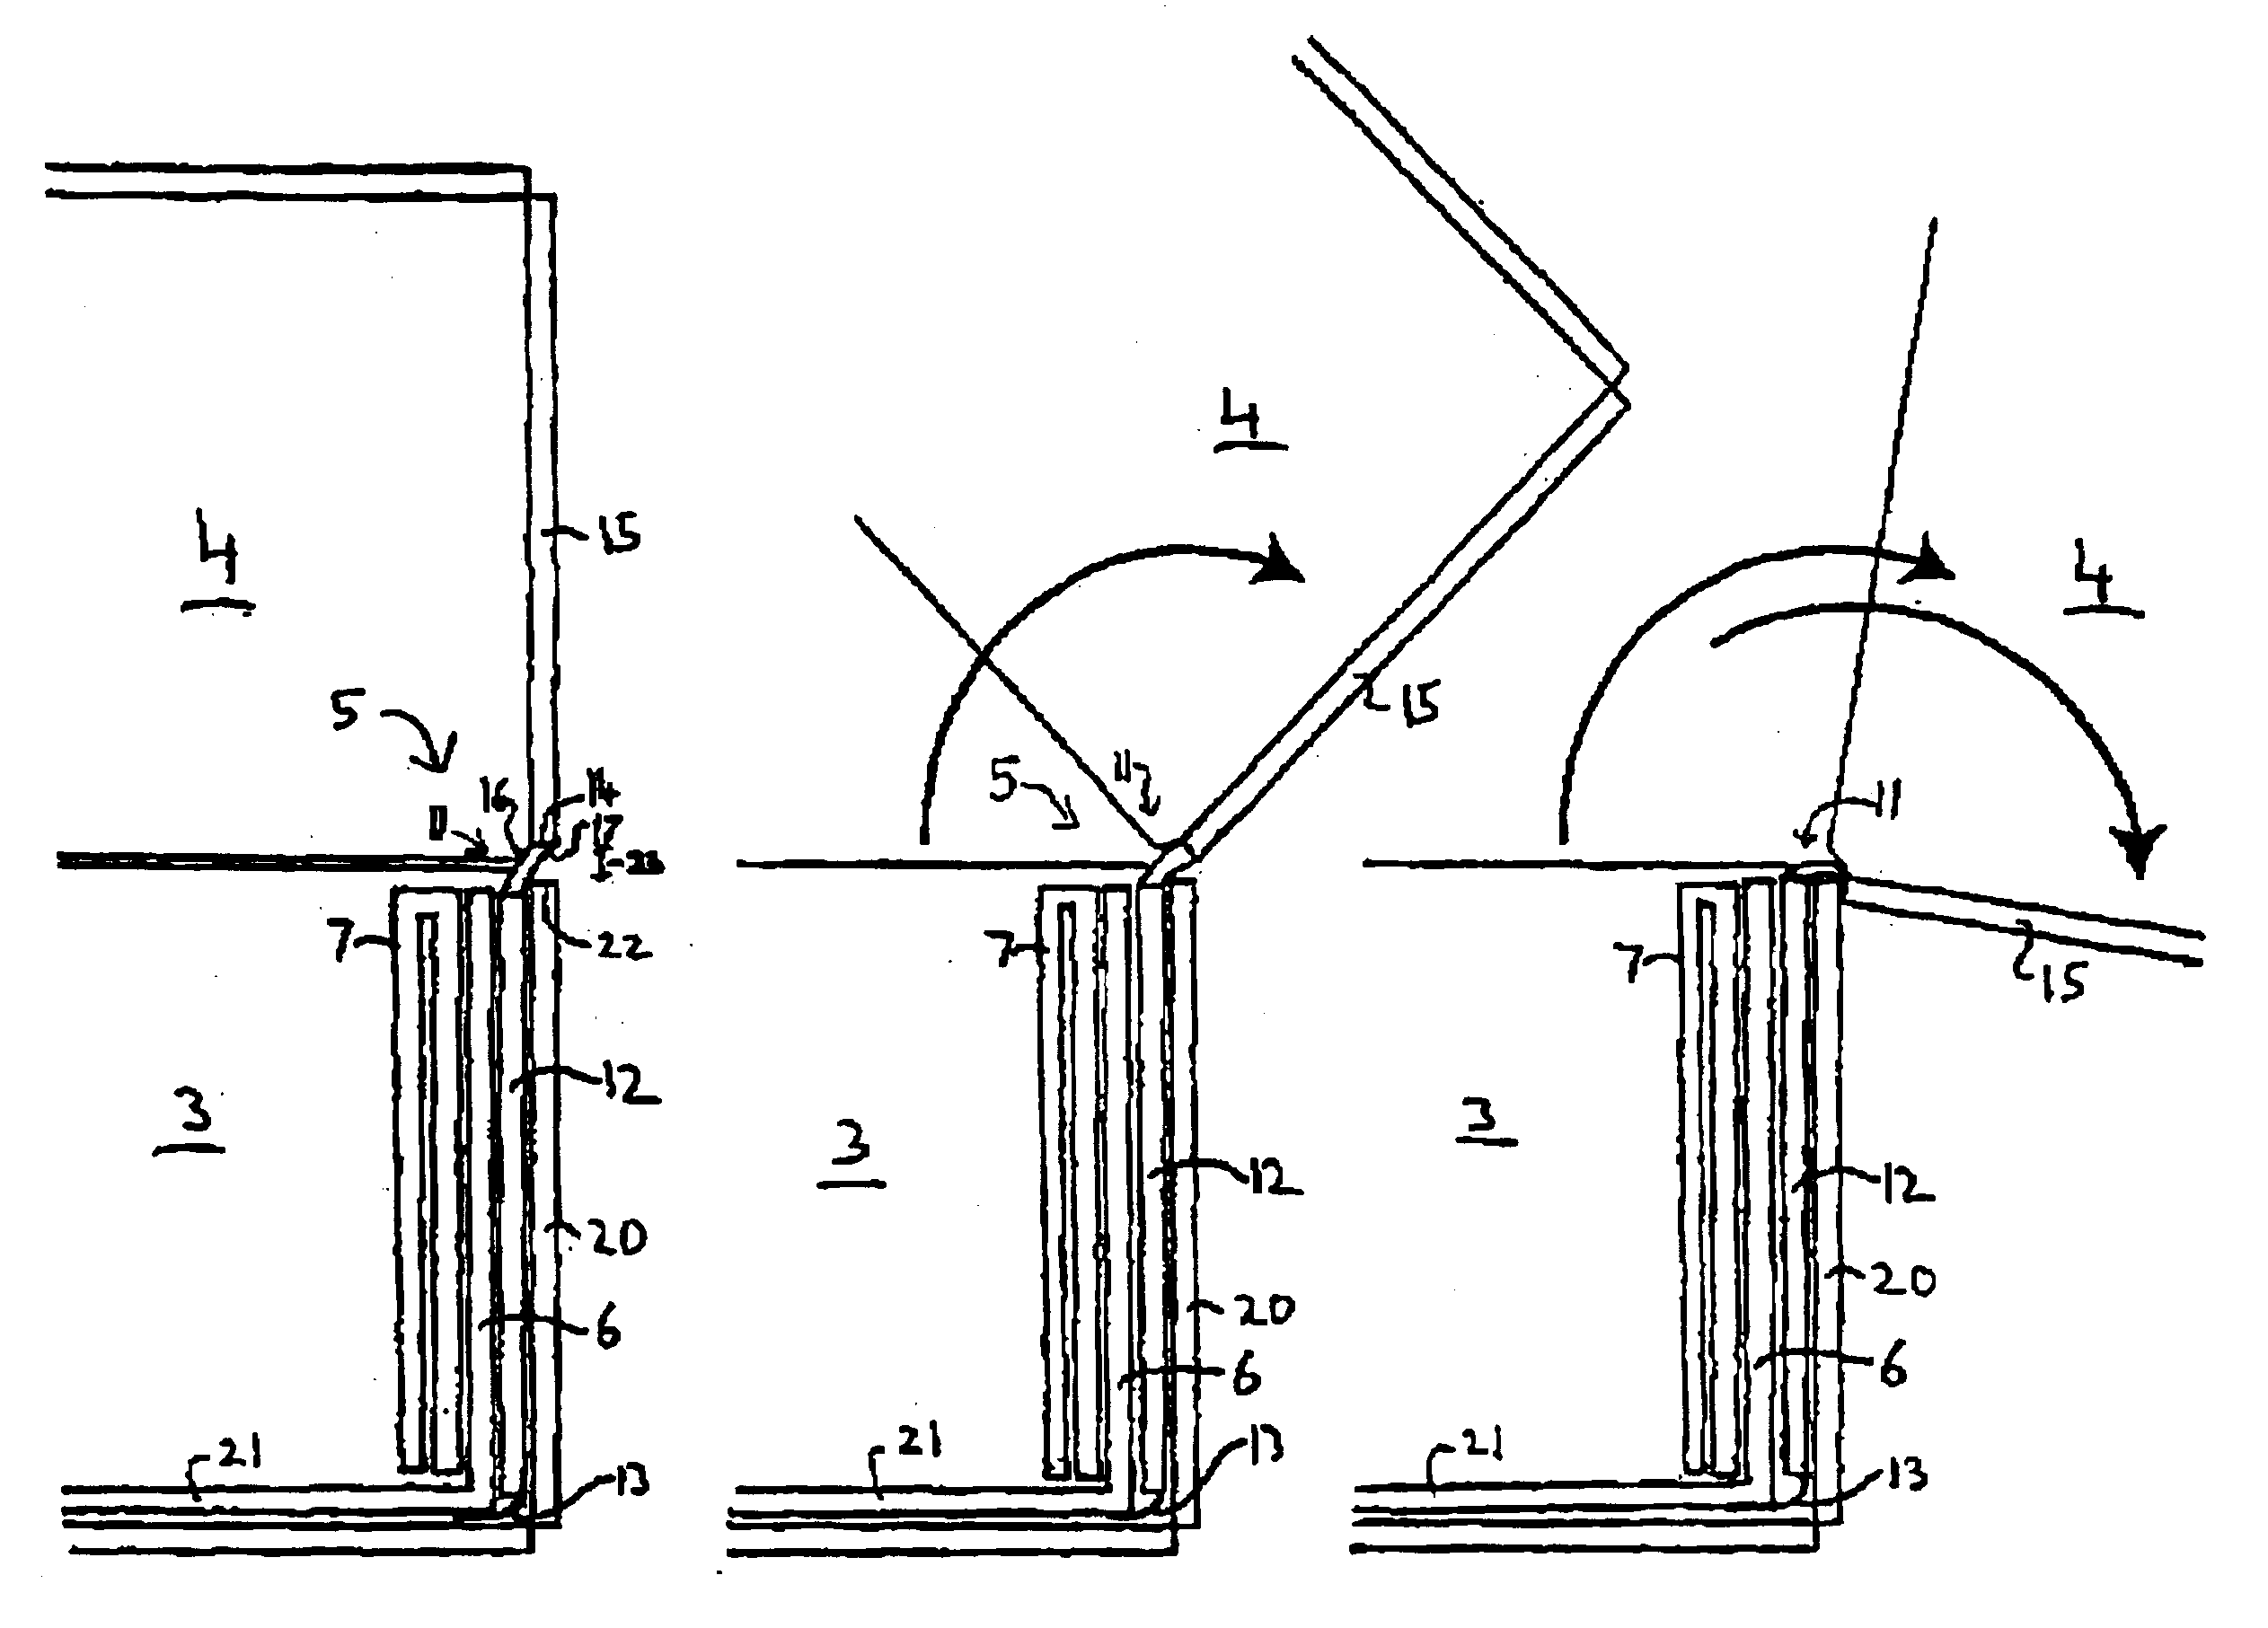 Display box having a hinge including a flexible and rigid portion